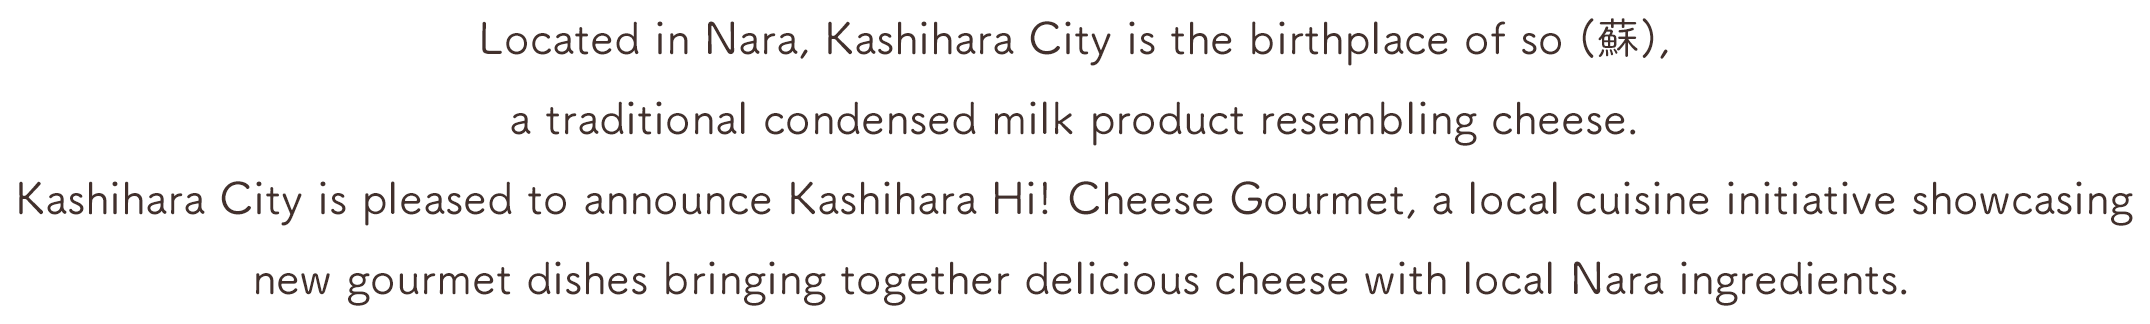 Located in Nara, Kashihara City is the birthplace of so (蘇), a traditional condensed milk product resembling cheese. Kashihara City is pleased to announce Kashihara Hi! Cheese Gourmet, a local cuisine initiative showcasing new gourmet dishes bringing together delicious cheese with local Nara ingredients.